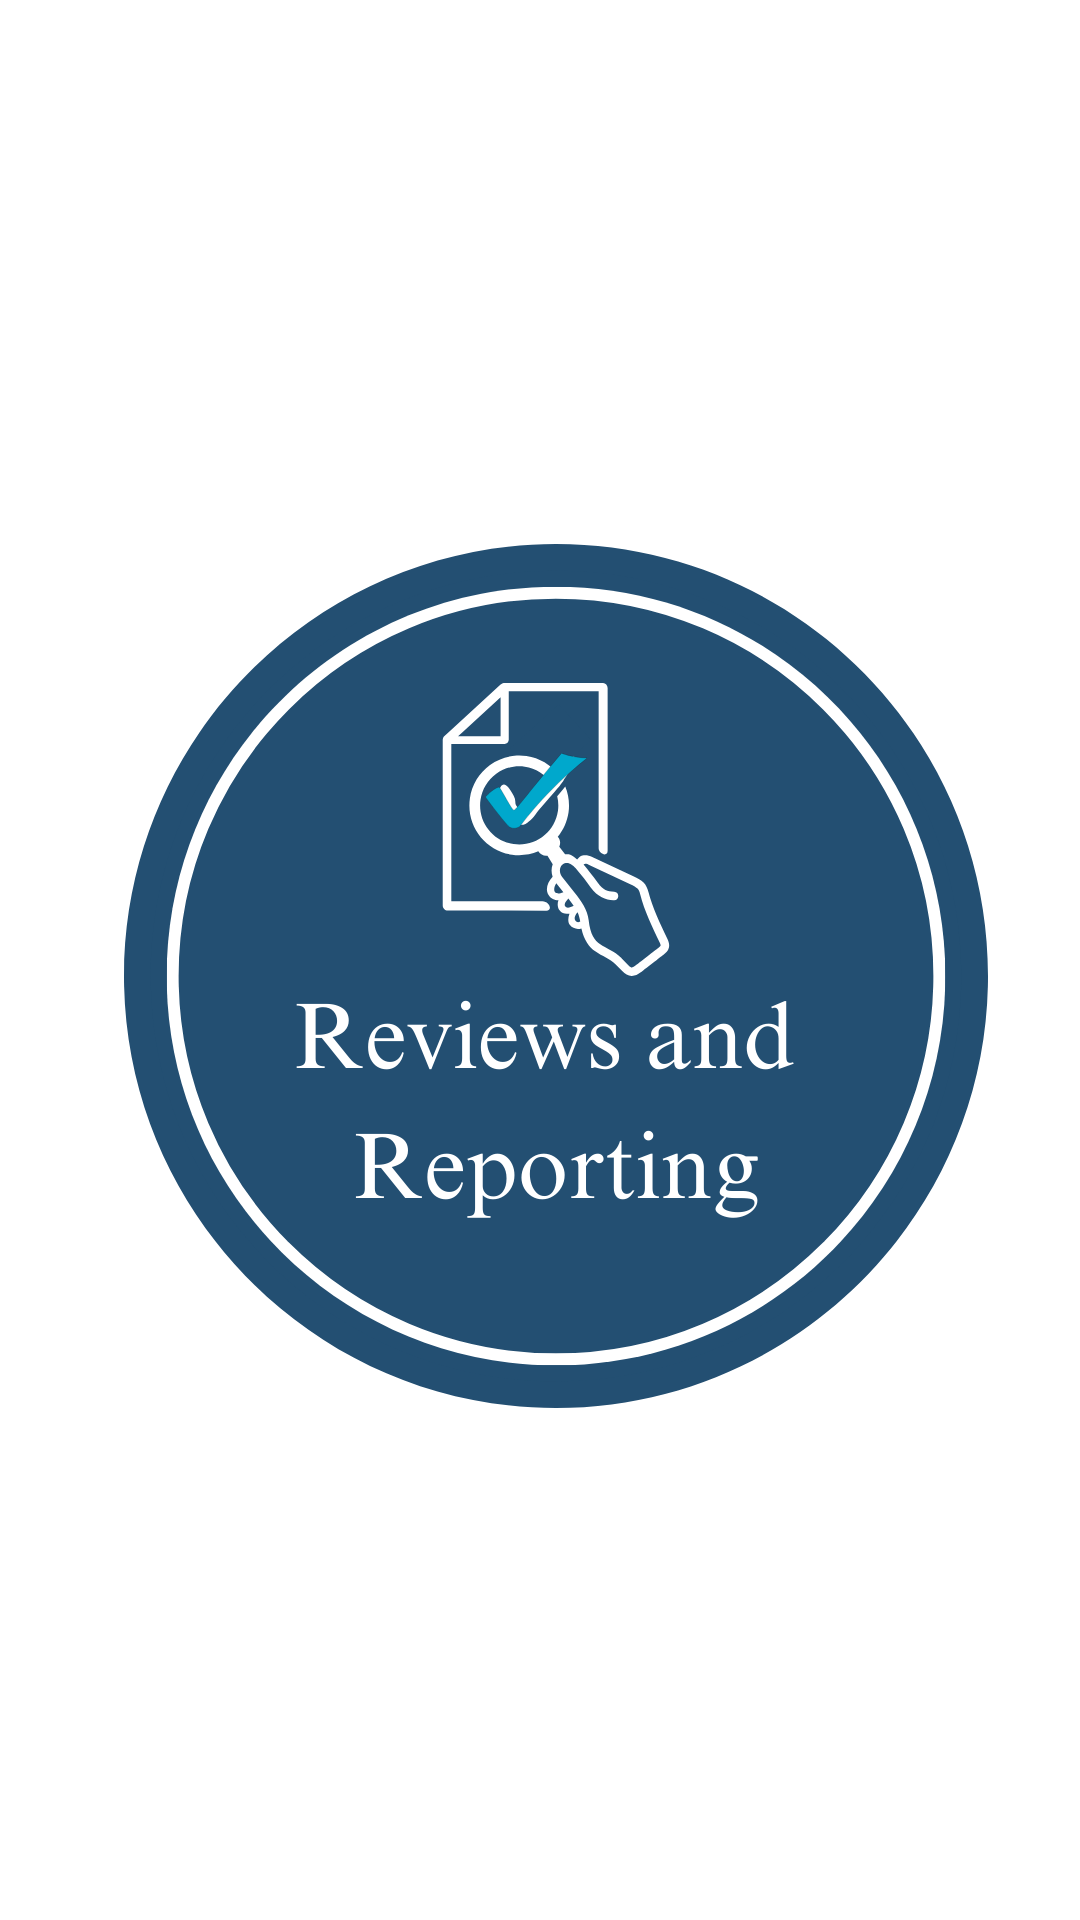 Reviews and Reporting